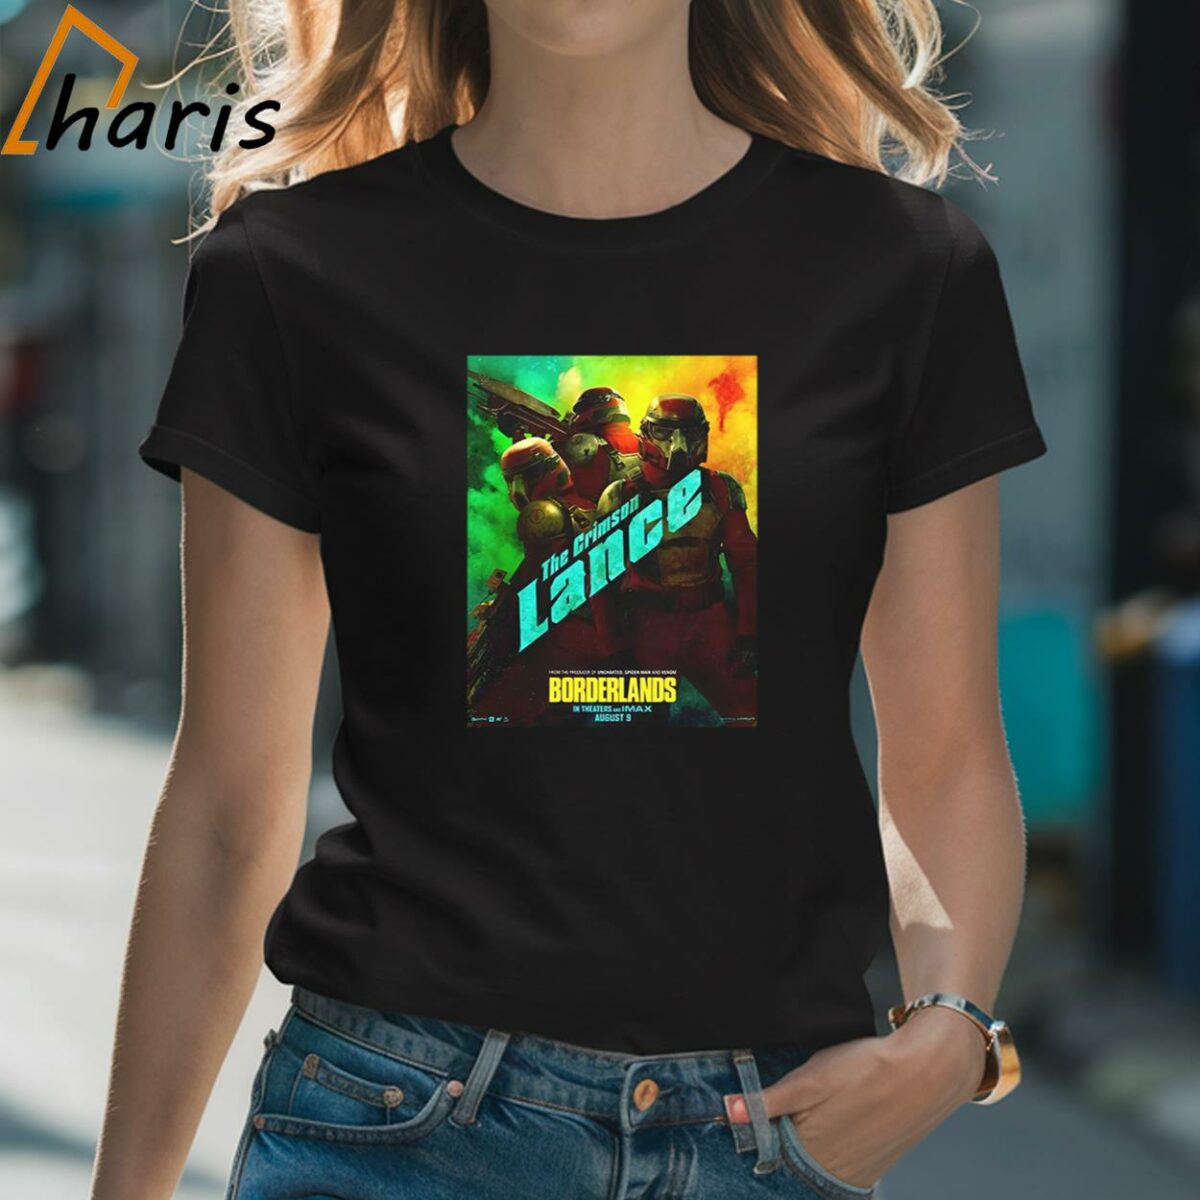 Lance Posters For Borderlands Releasing In Theaters And IMAX On August 9 Unisex T Shirt 2 Shirt